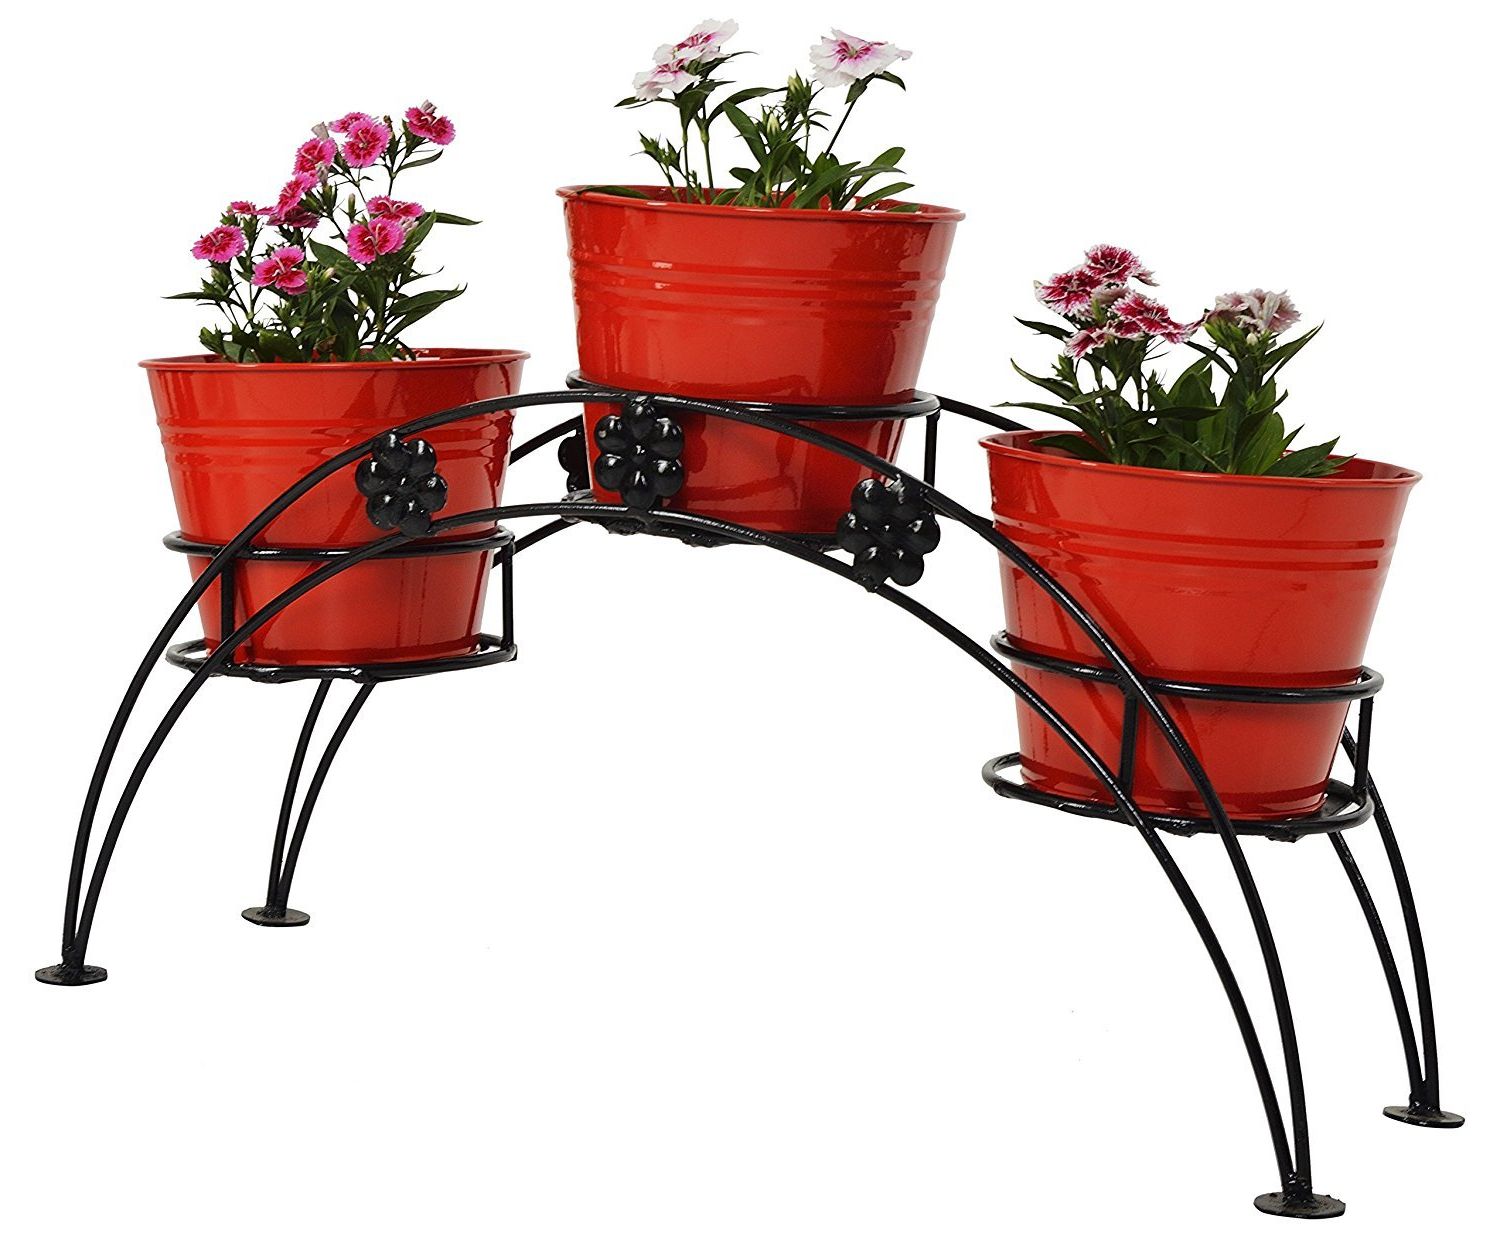 Green Gardenia Iron 3 Tier Pot Stand With Metal Planter (red) : Amazon (View 5 of 10)